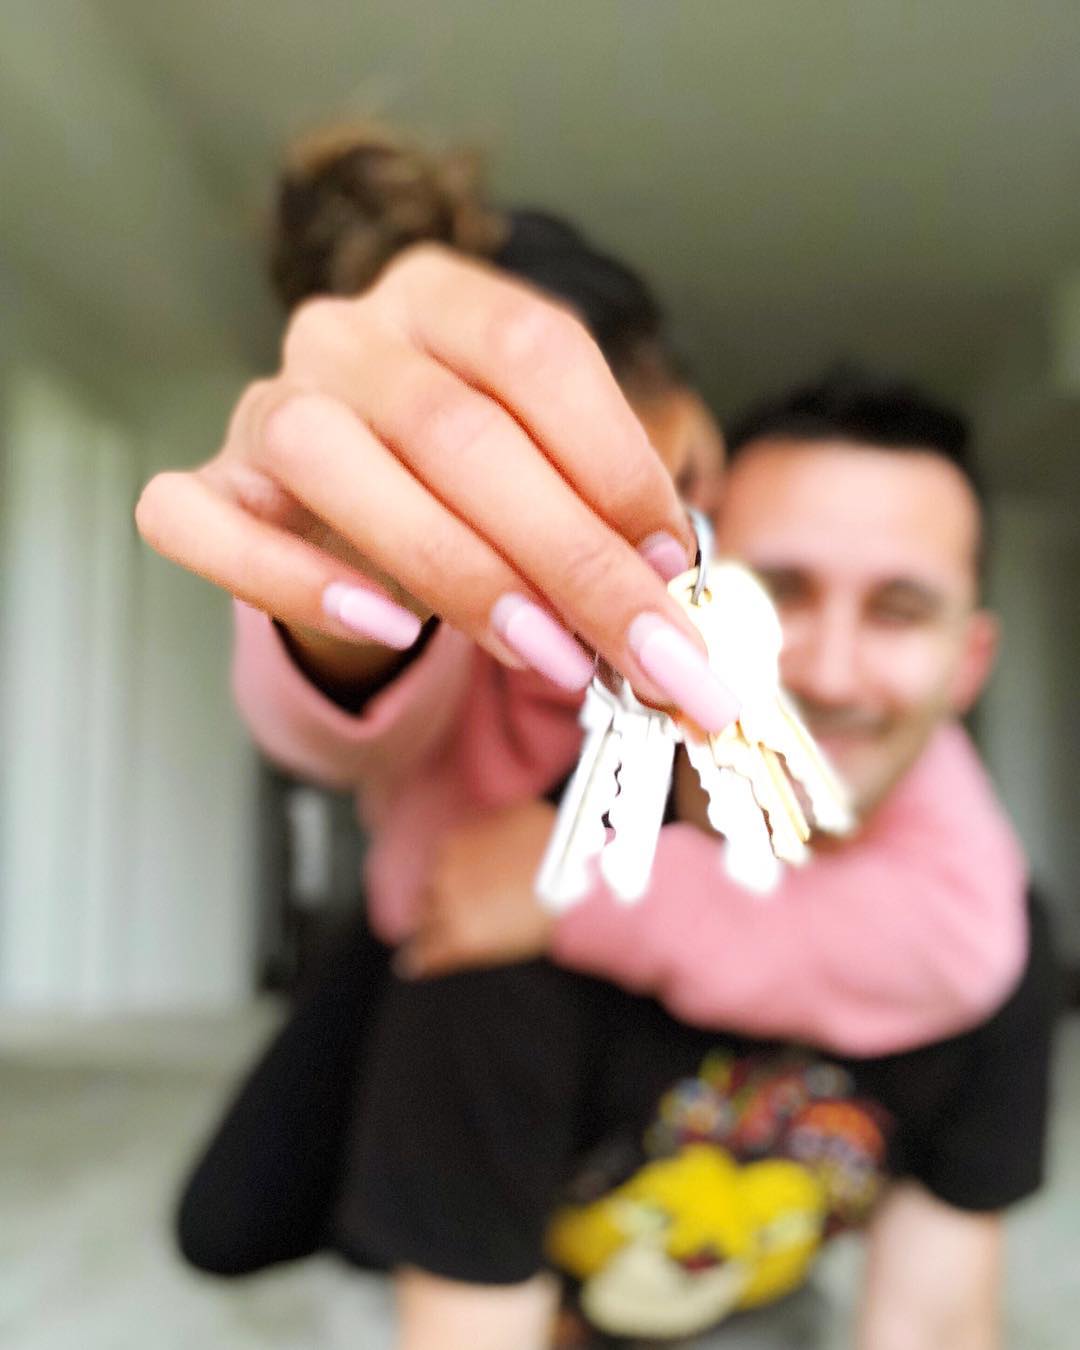 Couple Moving in Together Holding a Set of Keys. Photo by Instagram user @katrinamalaiba